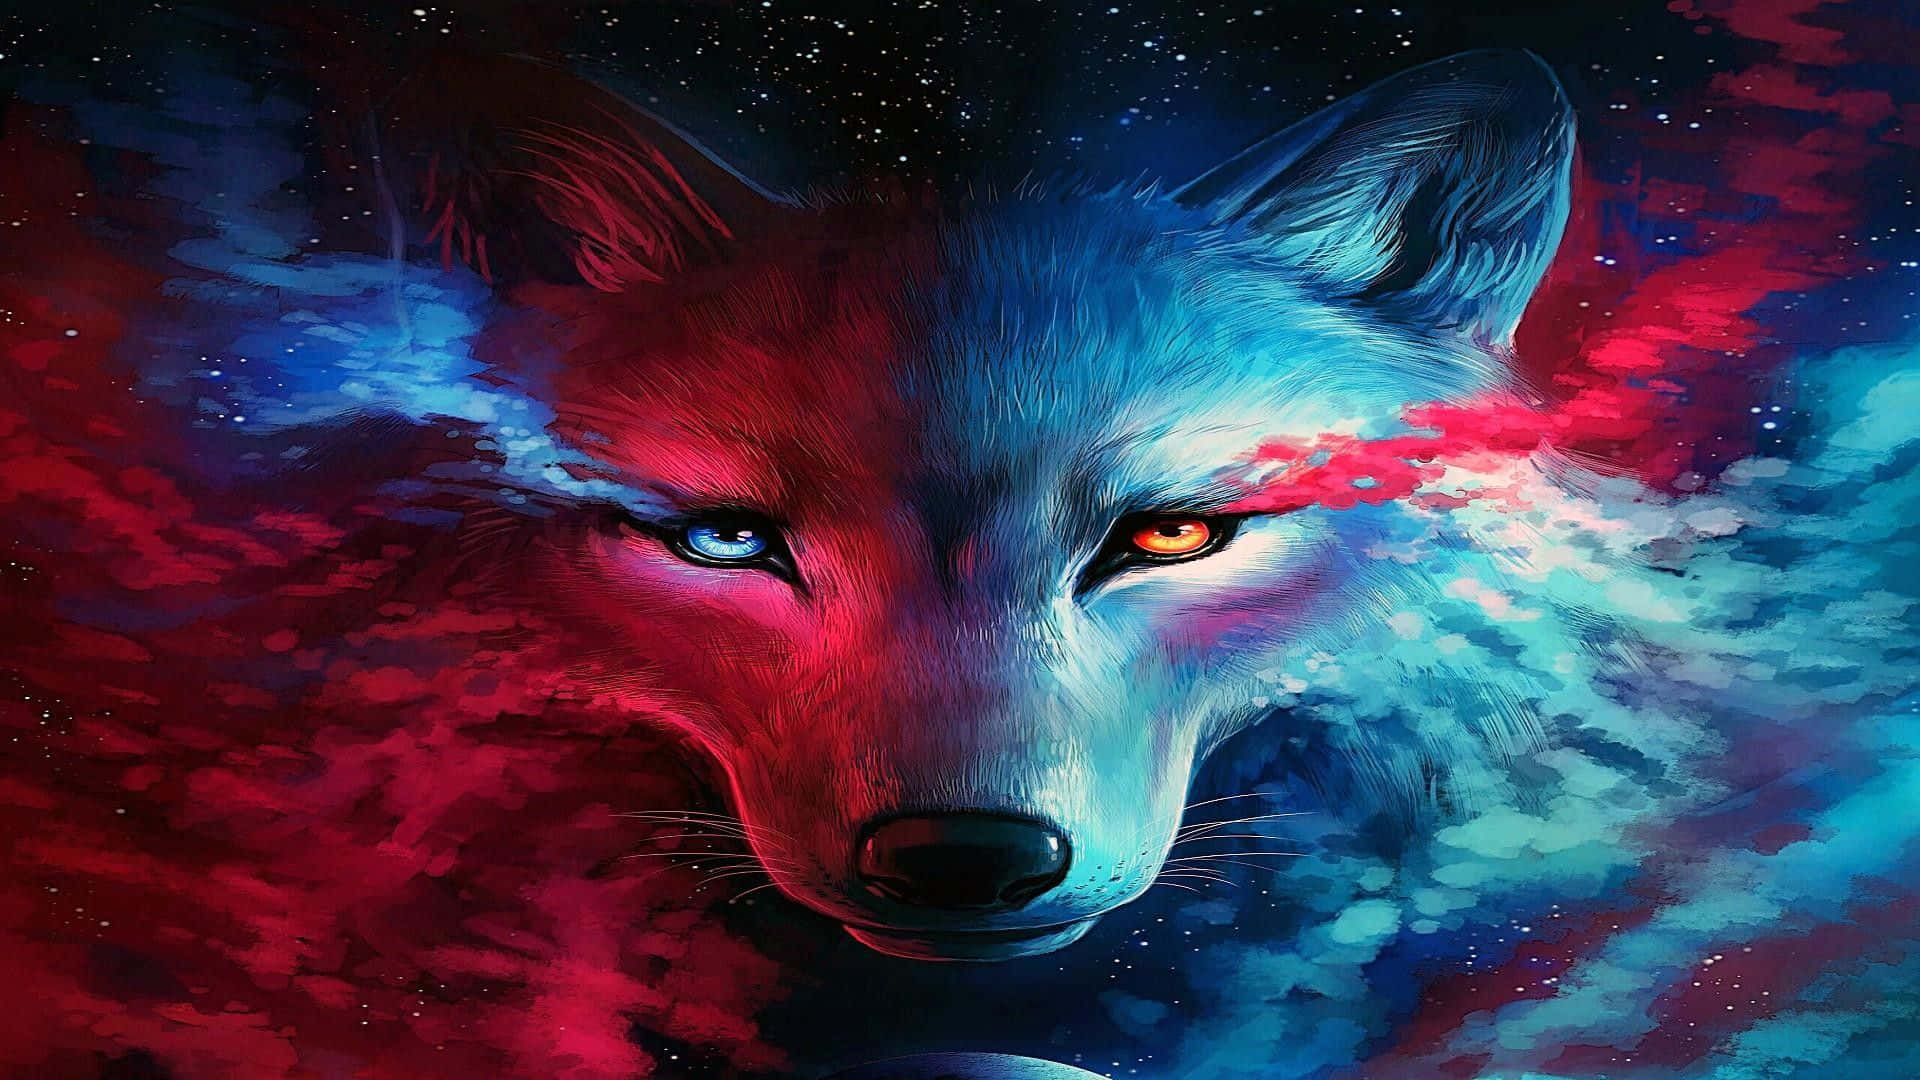 An exploration of ancient galaxies by the daring Galaxy Wolves Wallpaper